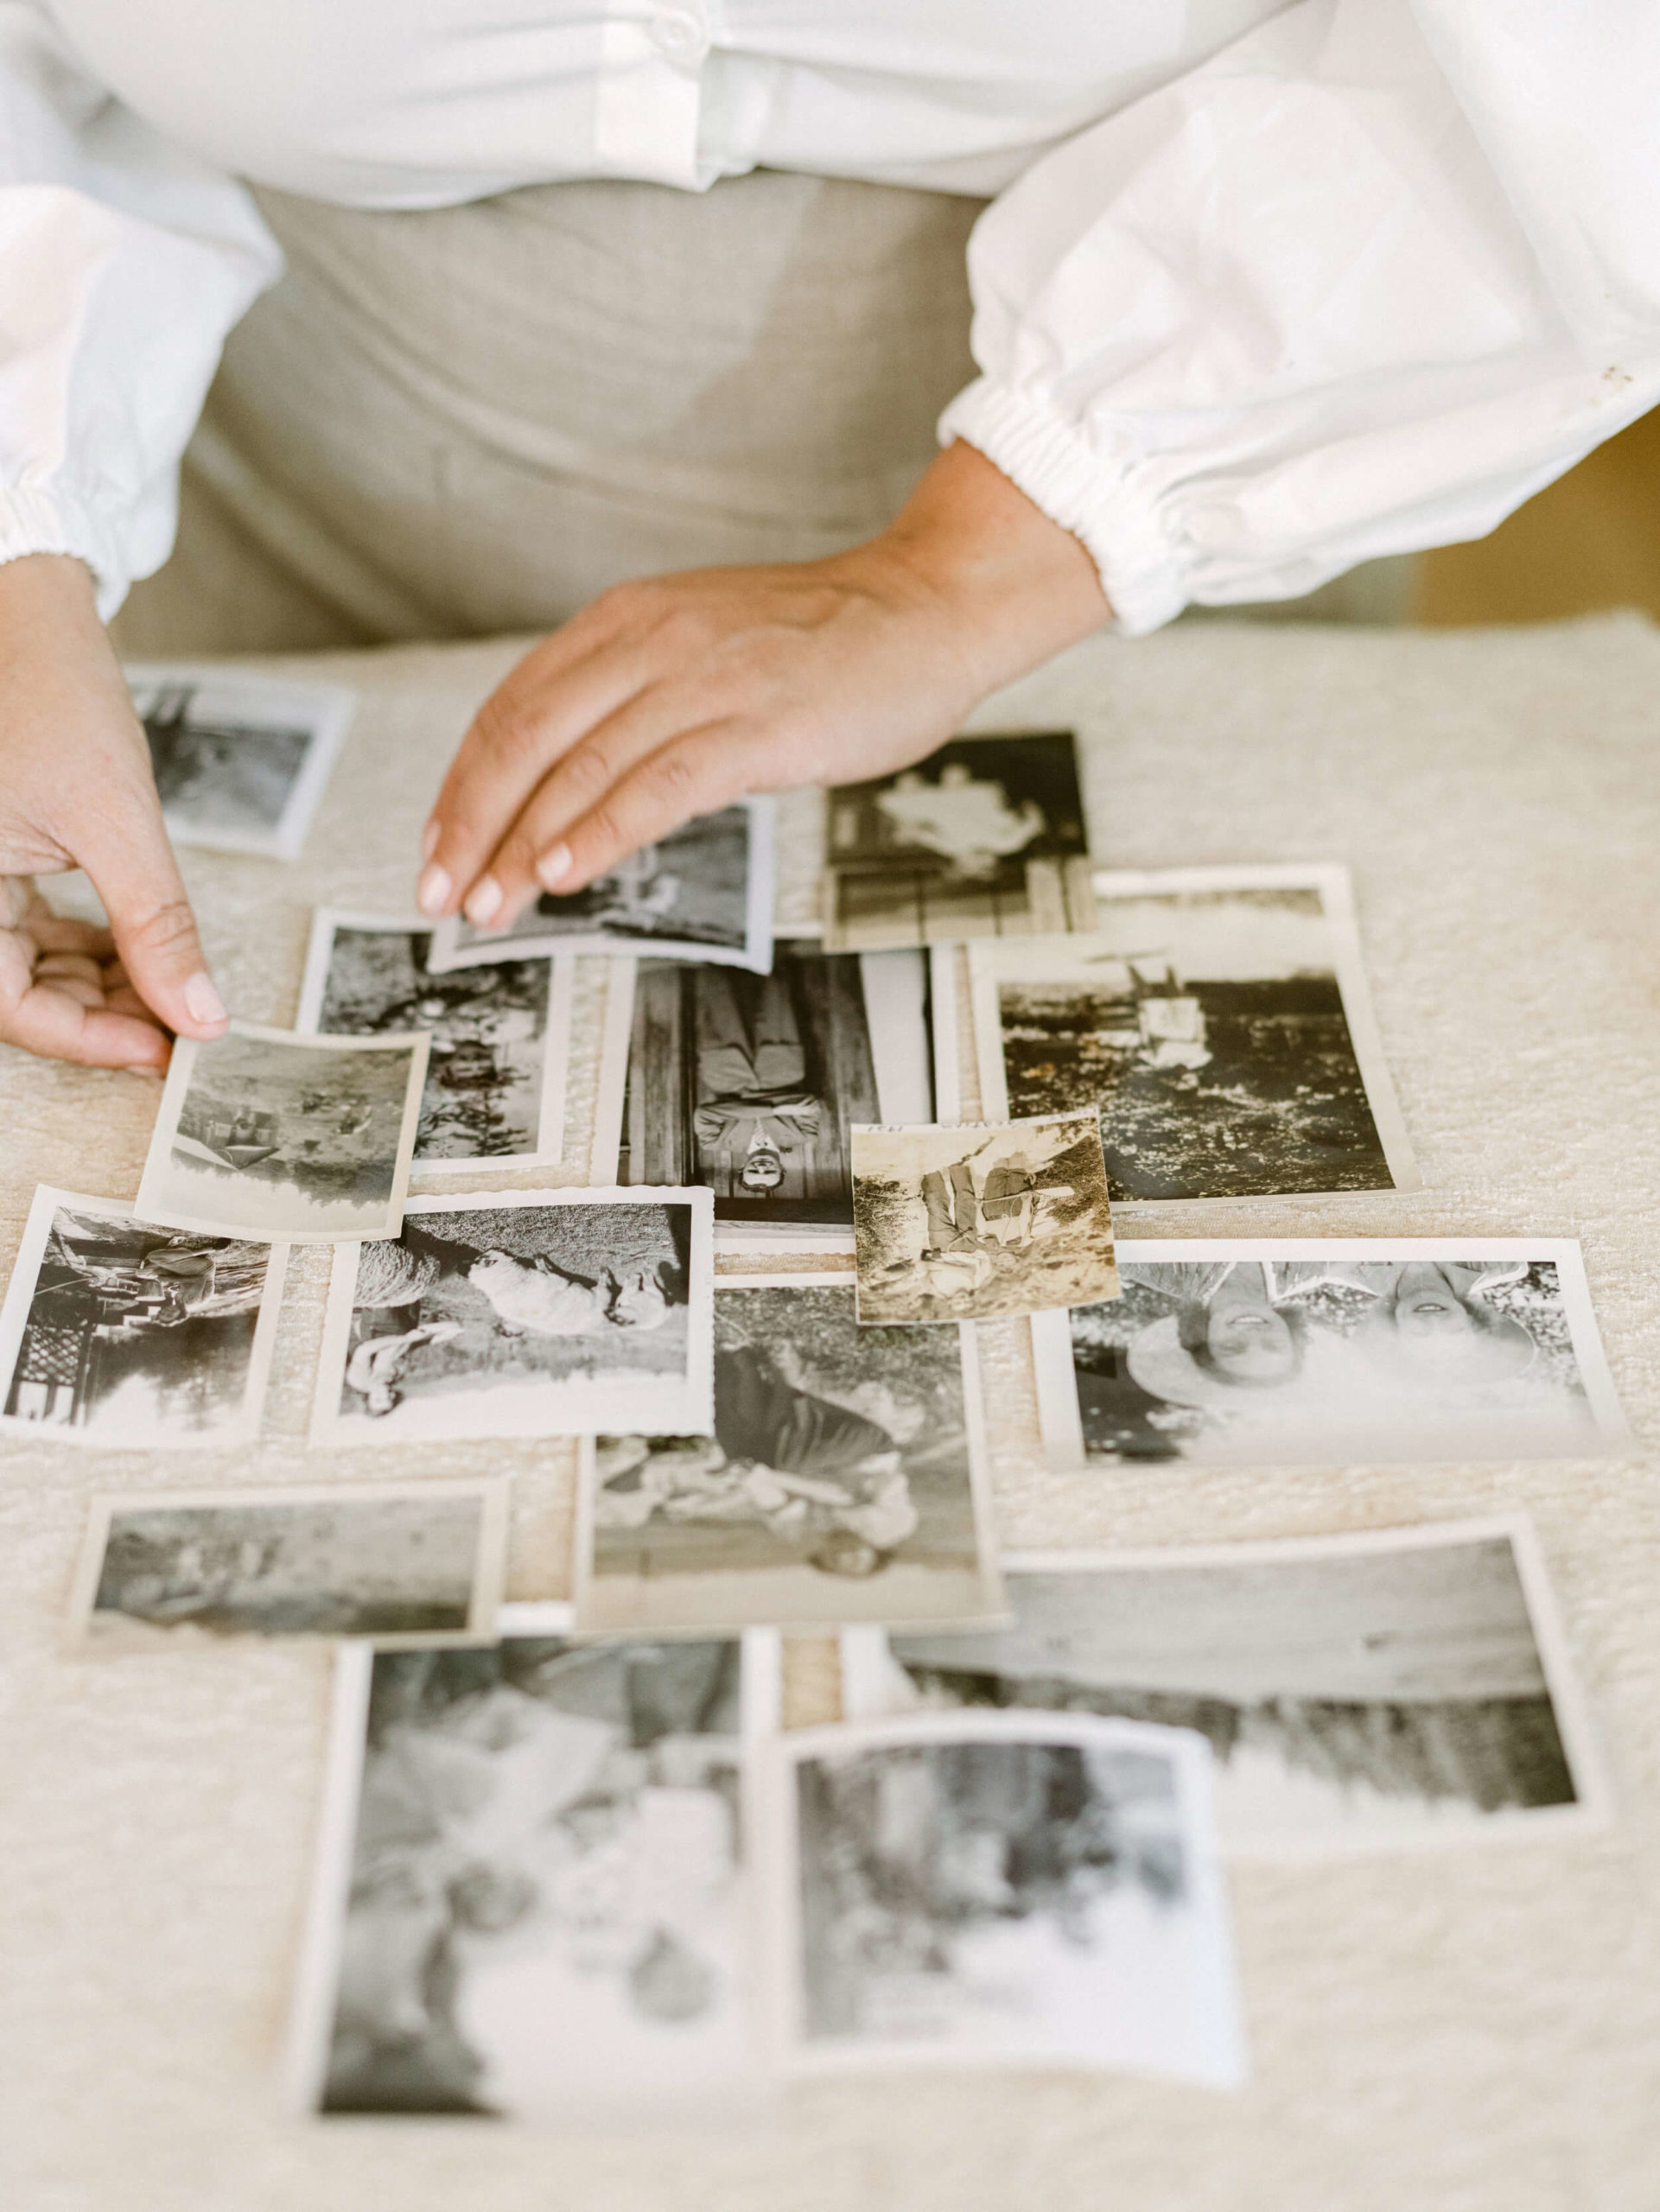 Joy Proctor finds inspiration and beauty creating with the KT Merry Presets at home.